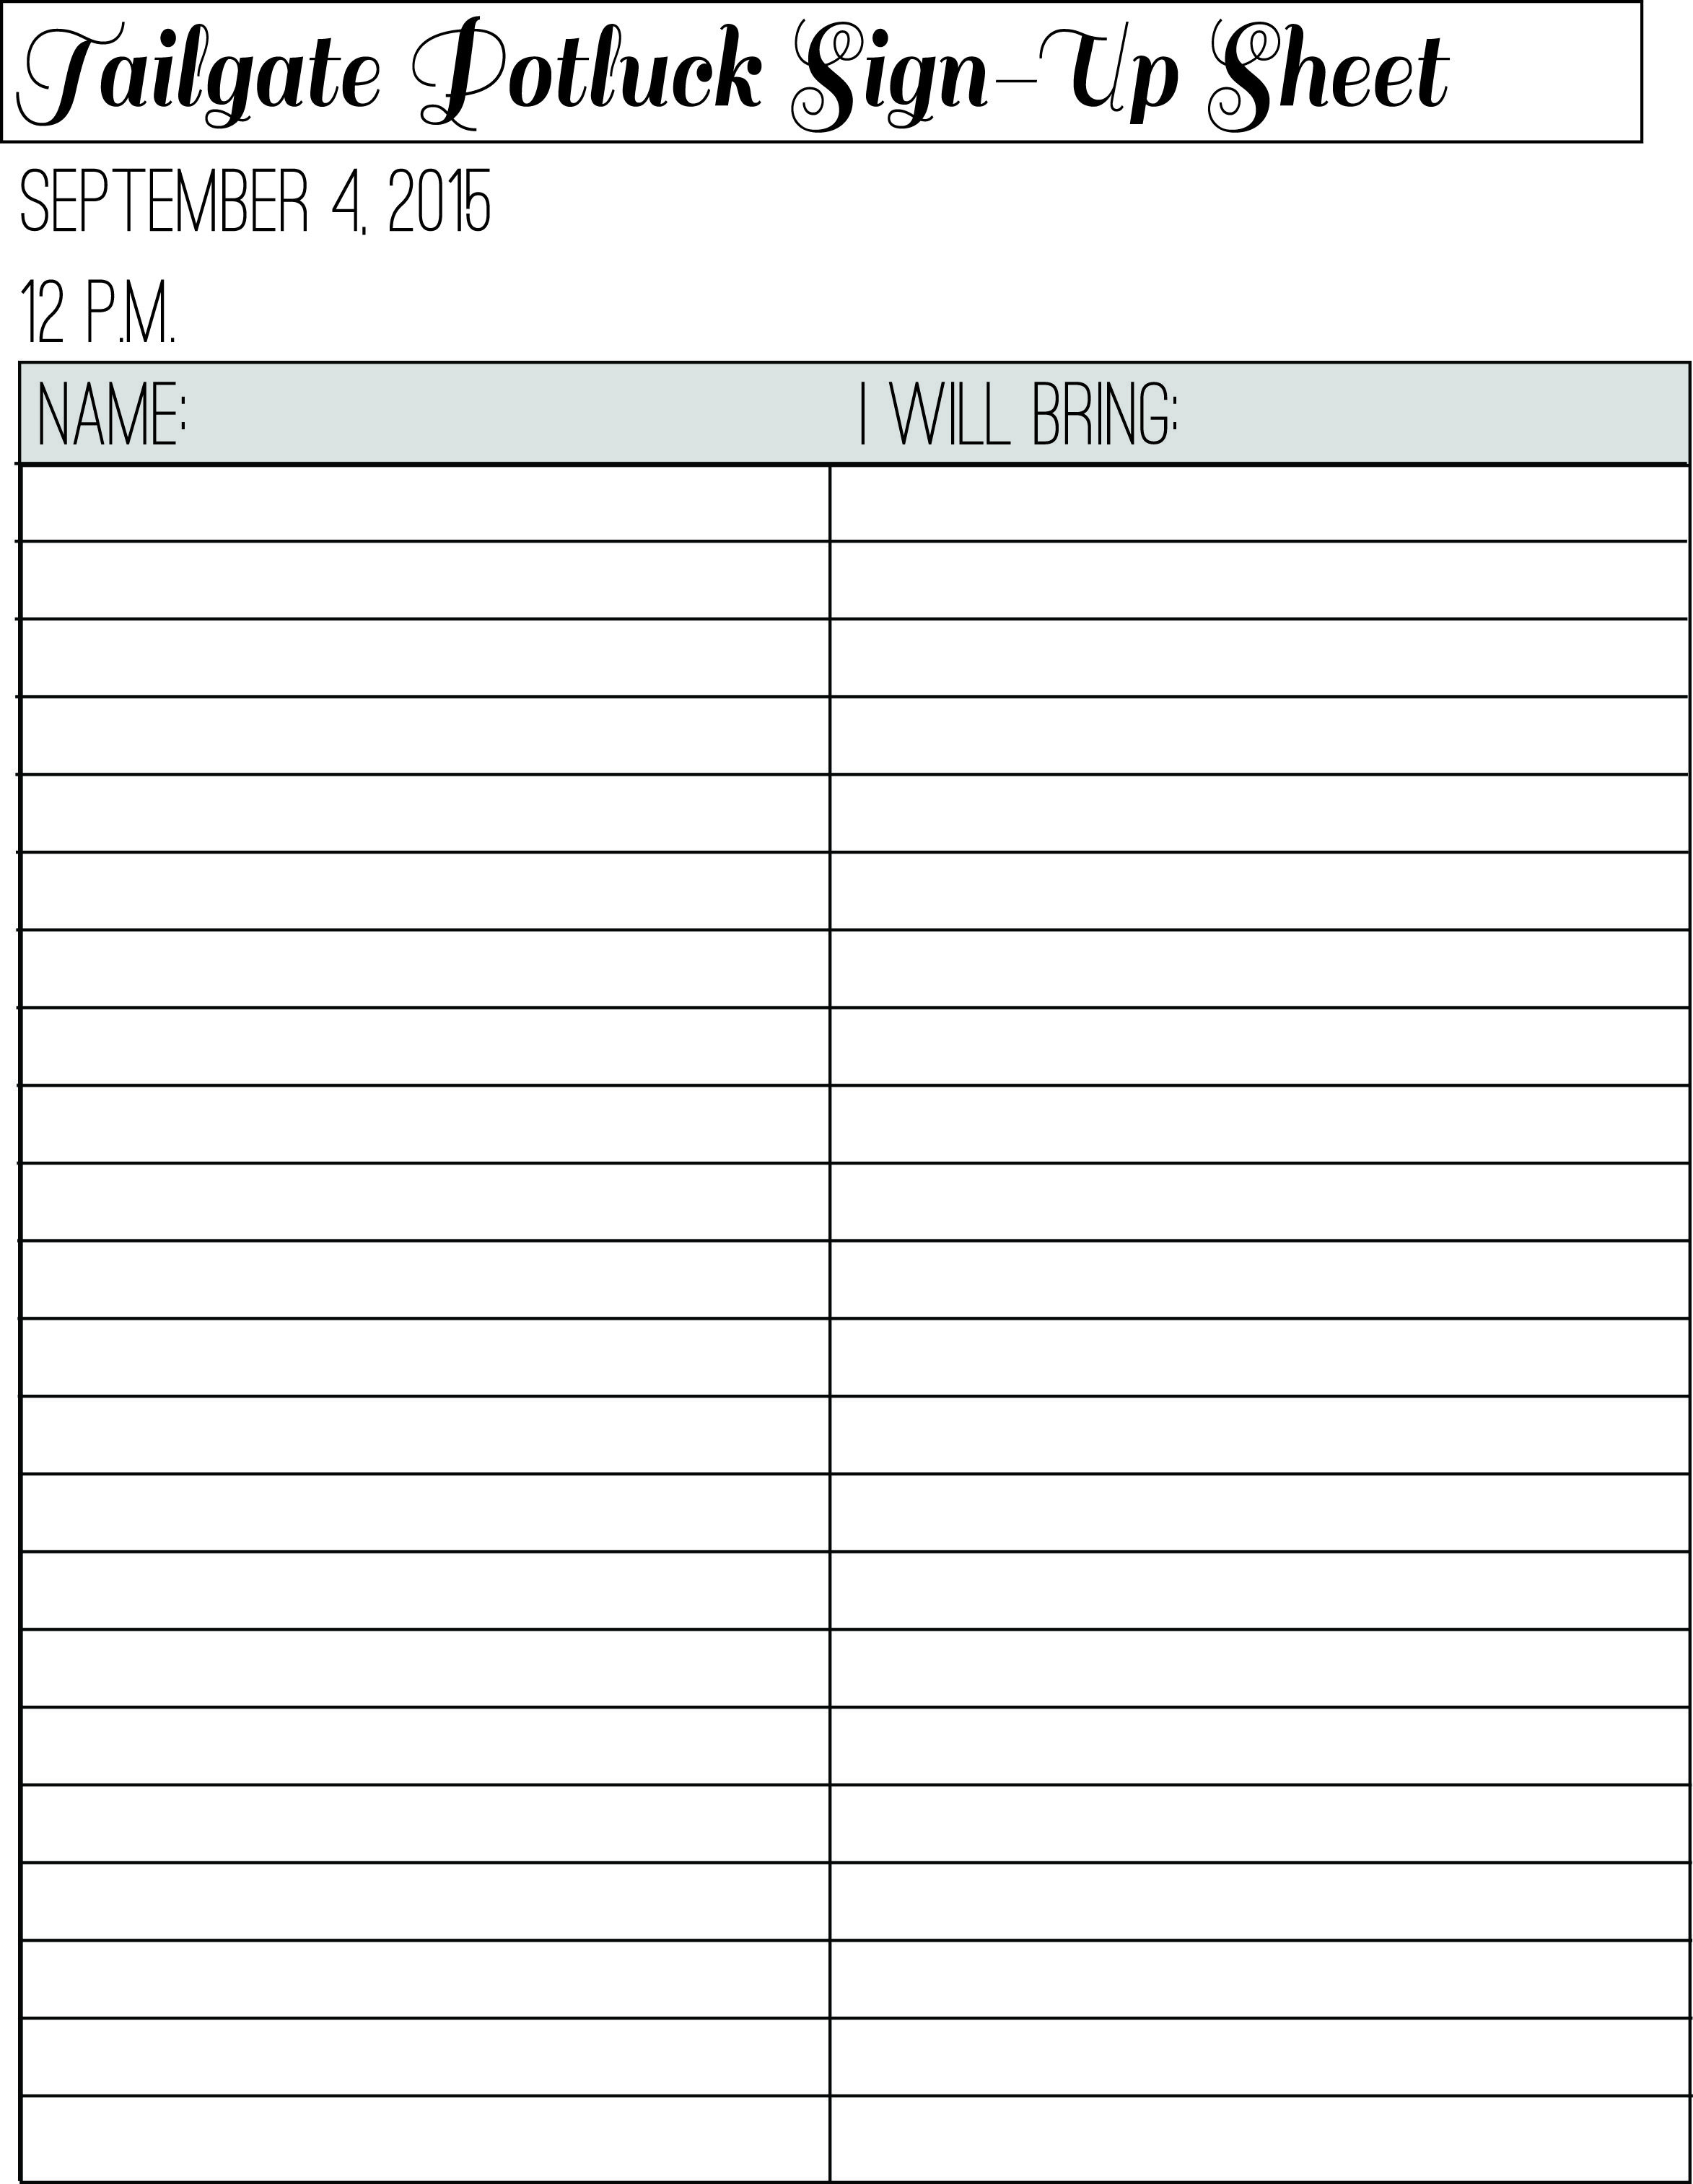 The Sign Up Sheet For Our Tailgate Potluck. | Valentine's Intended For Potluck Signup Sheet Template Word